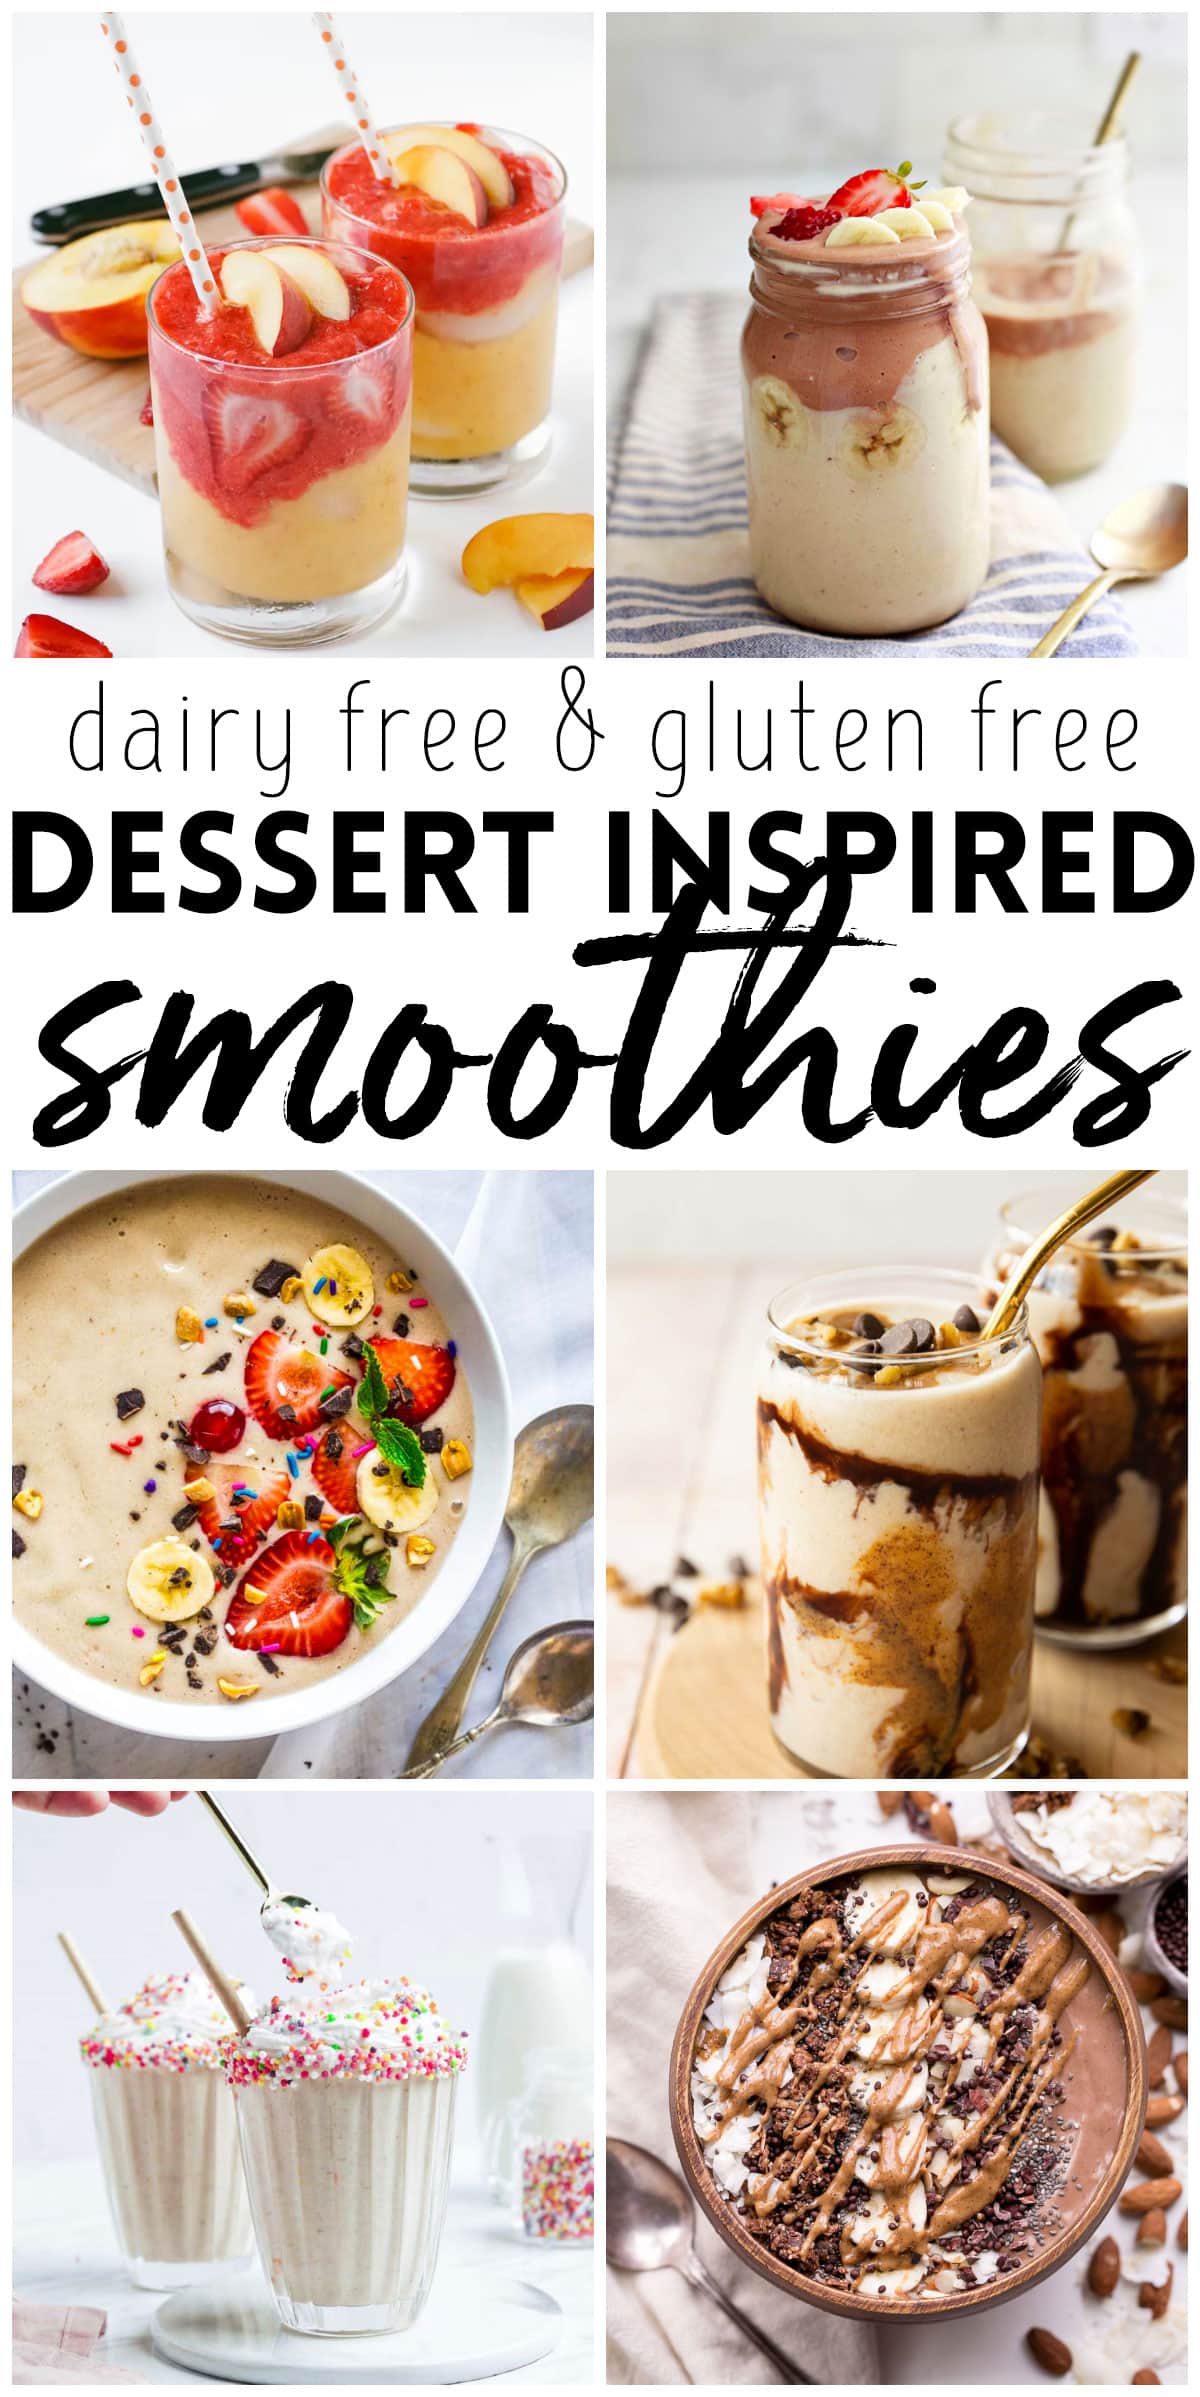 Photo collage showing several dairy free dessert-inspired smoothies. 